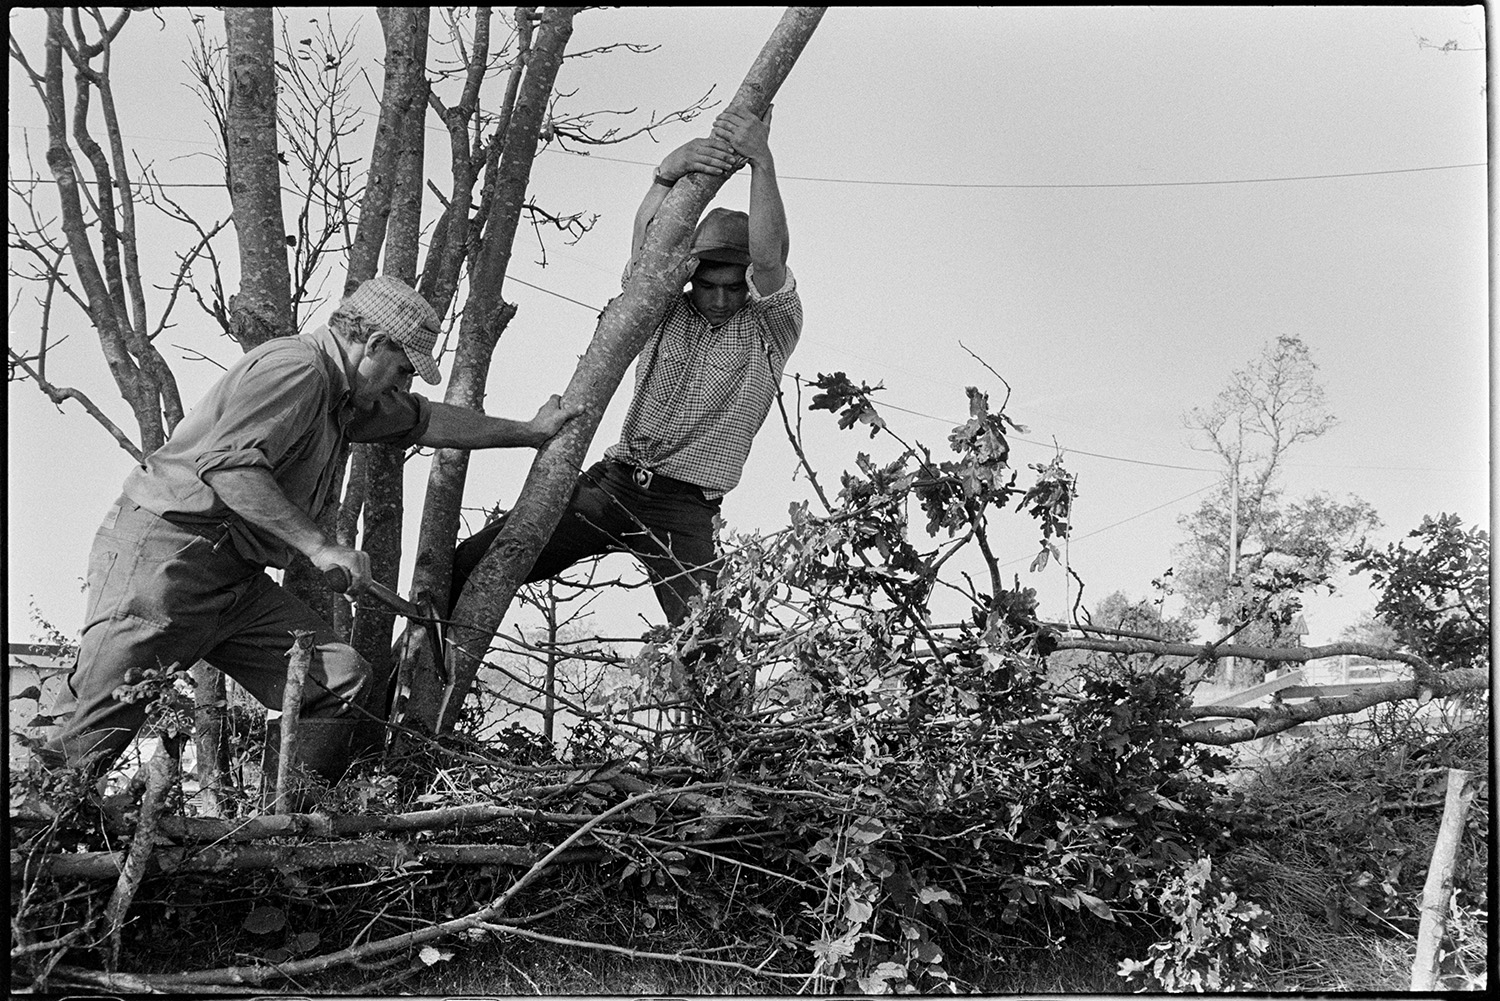 Farmers laying hedge, using wooden crucks to hold it. 
[Alf Pugsley and Stephen Squire laying a hedge at Lower Langham, Dolton.  Alf Pugsley is chopping the branch of a tree with an axe, while Stephen Squire bends the branch.]